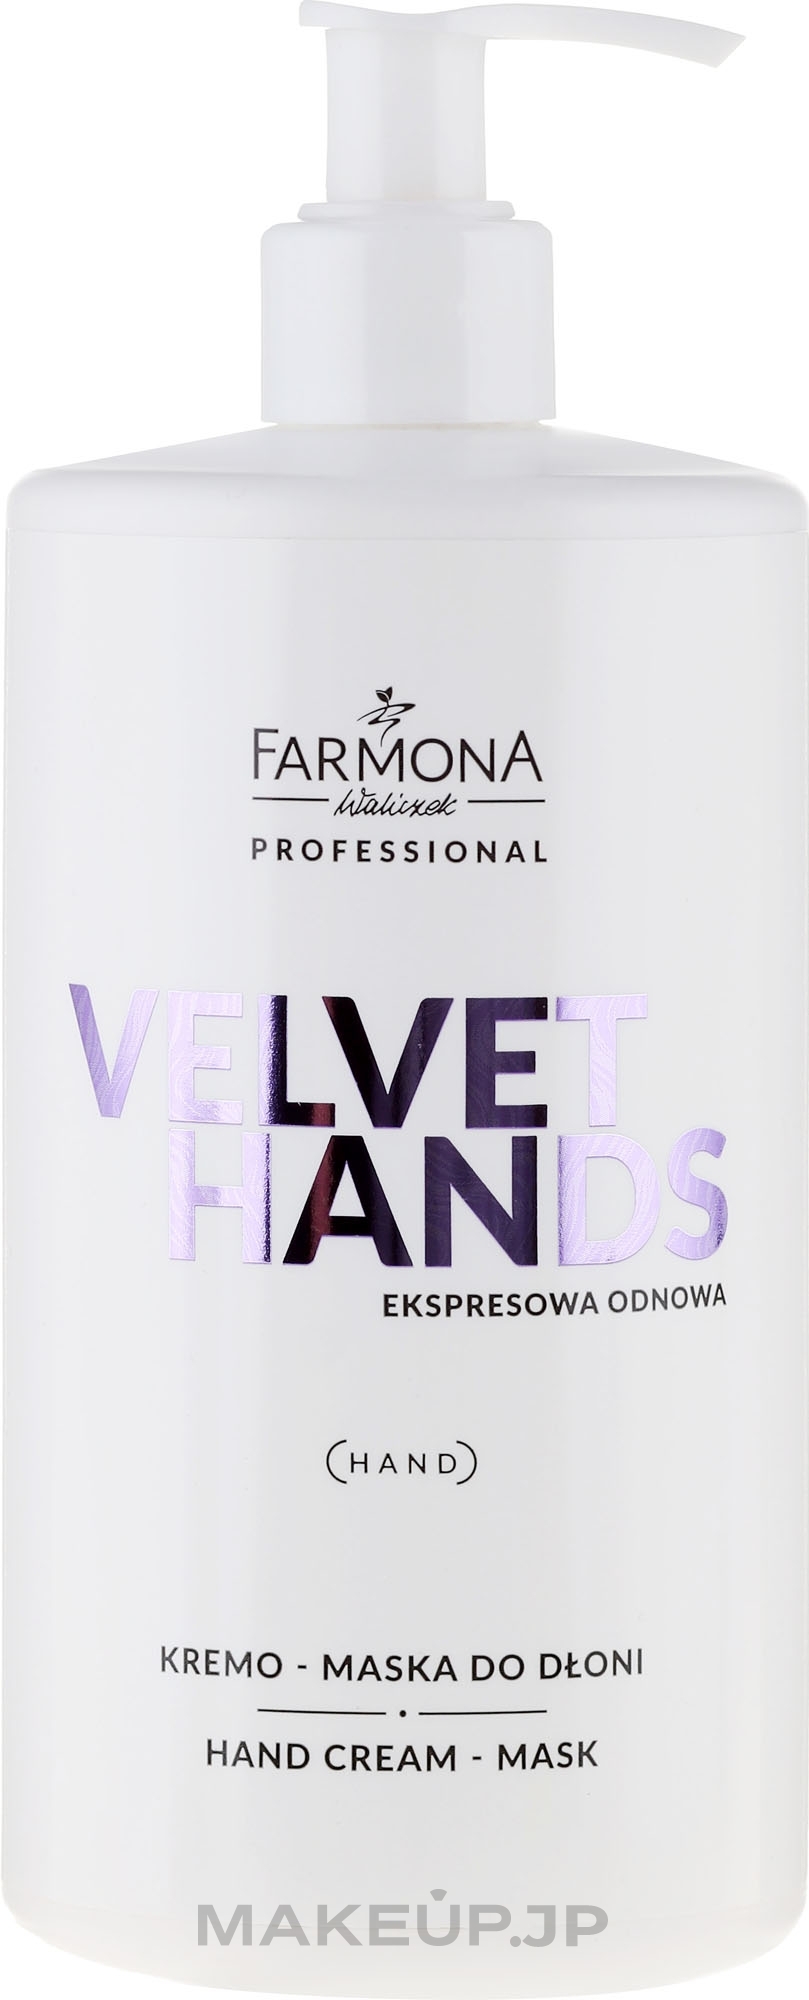 Hand Cream-Mask with Lily and Lilac Scent - Farmona Velvet Hands Cream-Mask — photo 500 ml